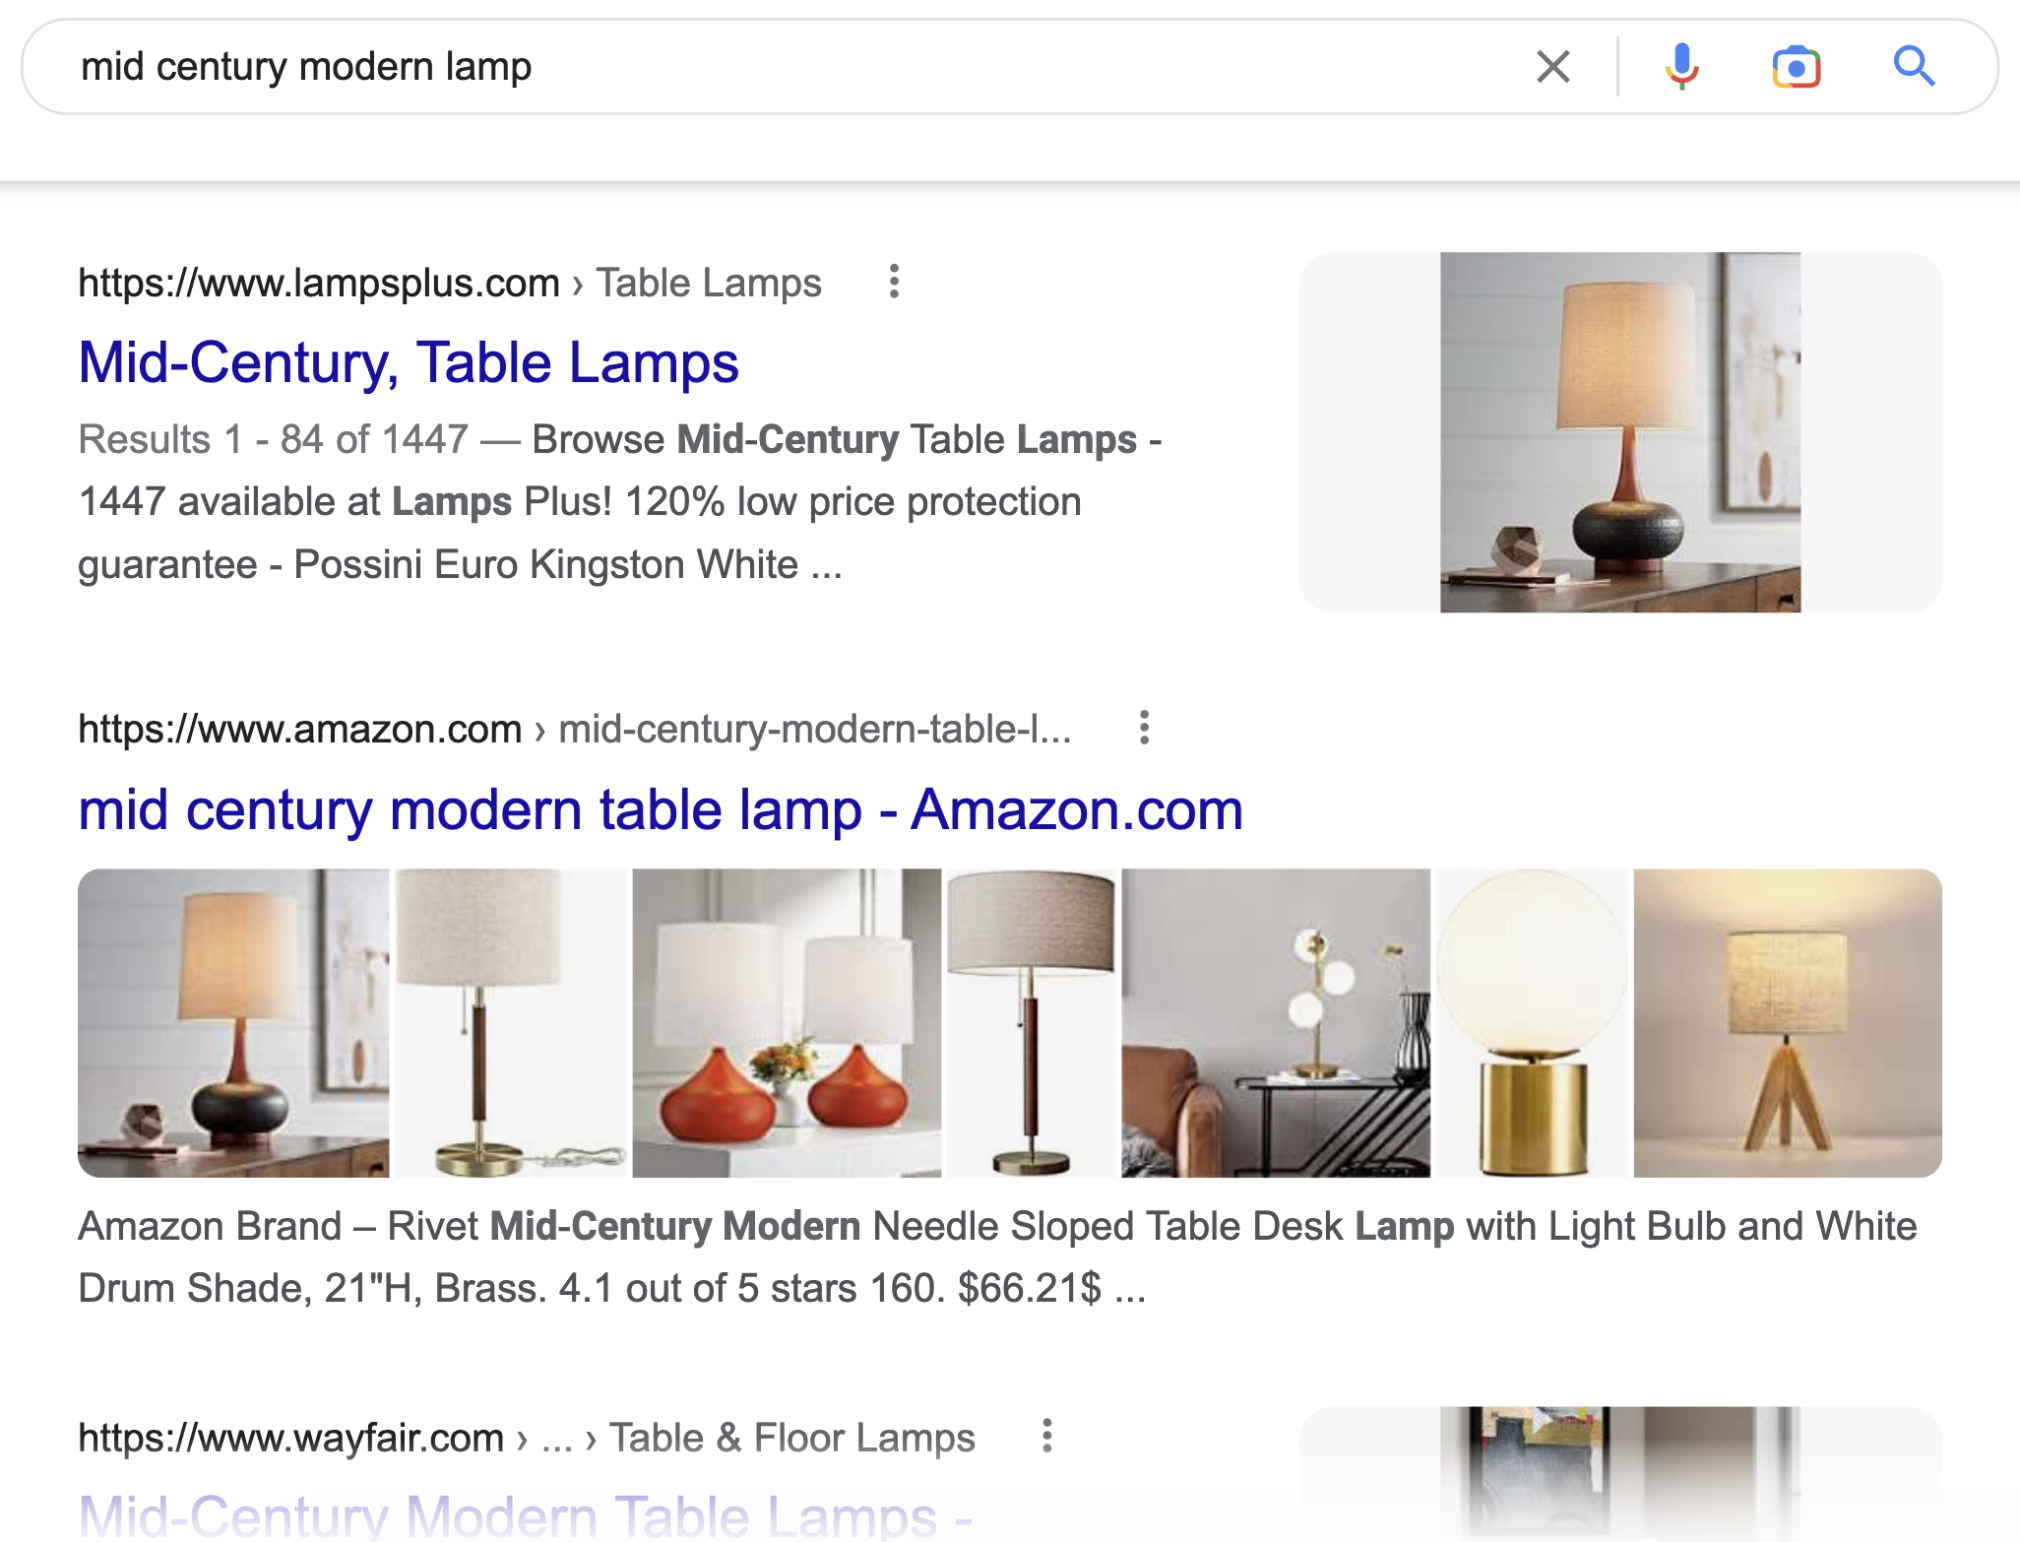 The Google SERP for mid century modern lamp displays organic results with titles, page URLs, and meta descriptions